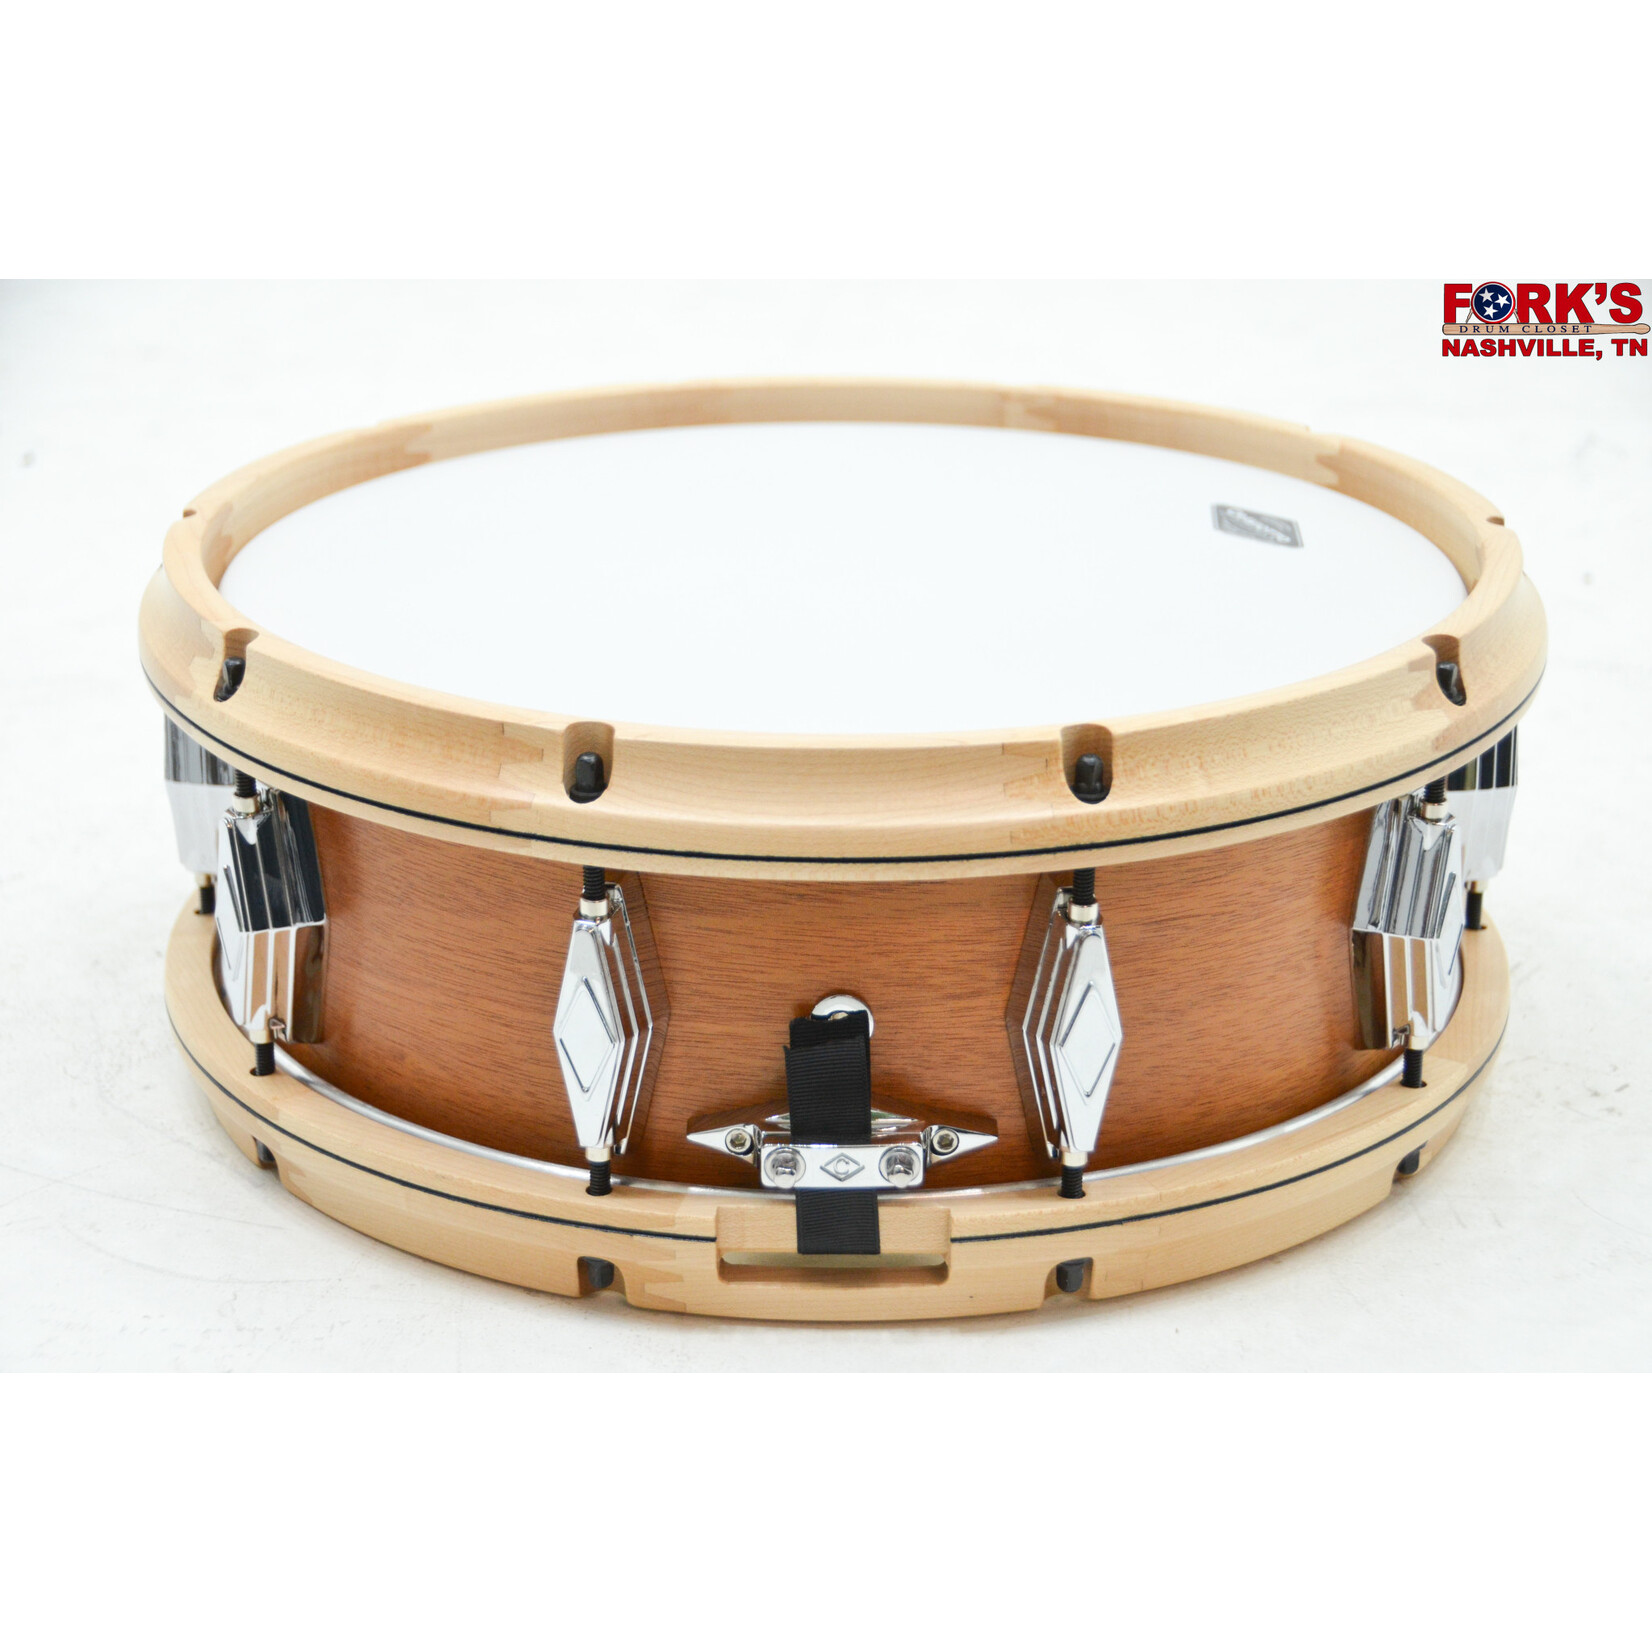 Craviotto Craviotto Builders Choice Private Reserve 5x14 Mahogany Snare Drum w/ Wood Hoops